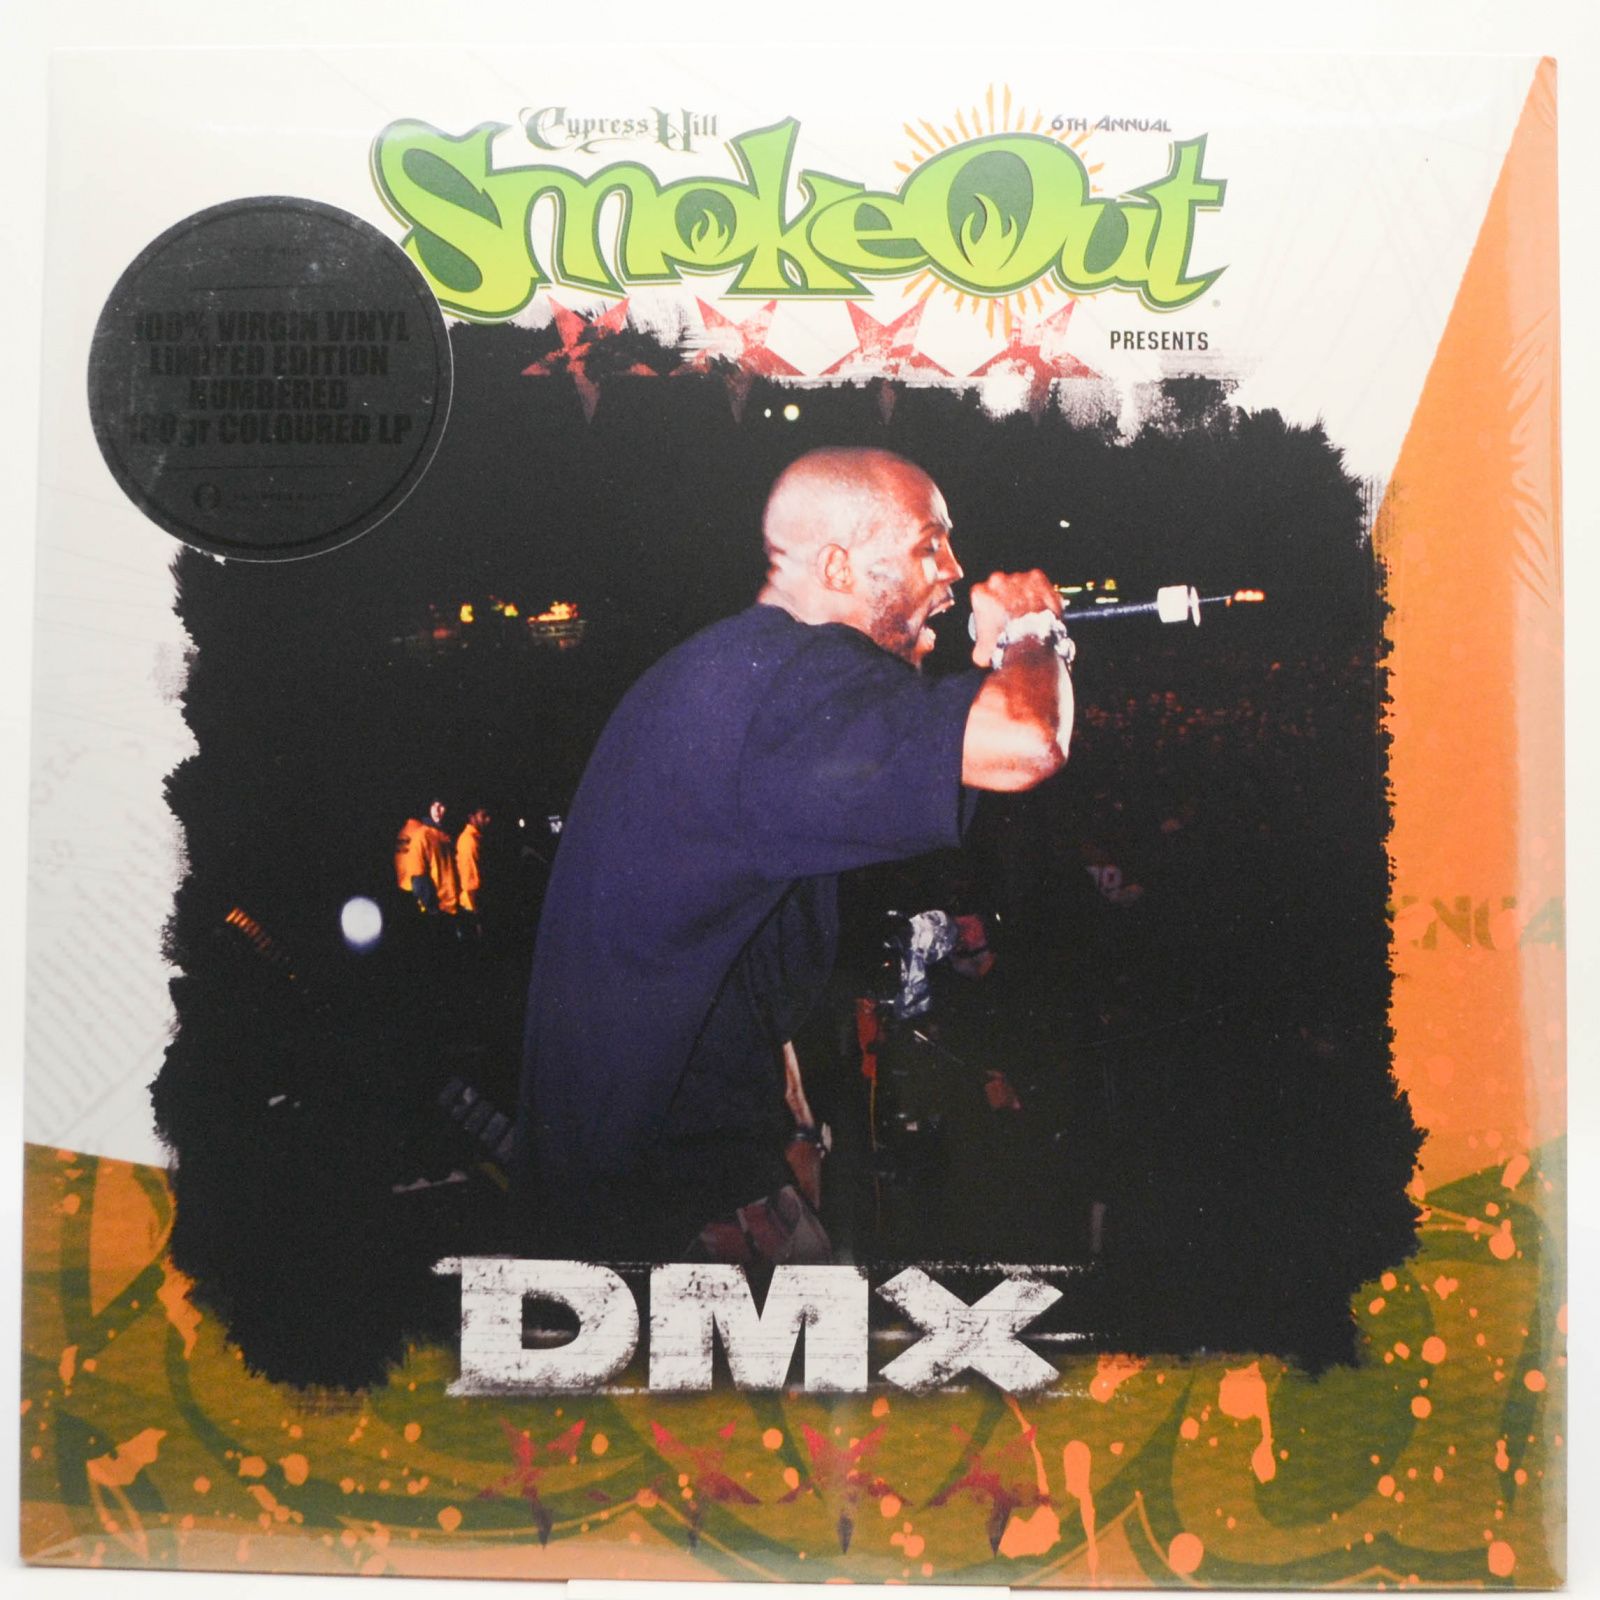 DMX — The Smoke Out Festival Presents, 2019